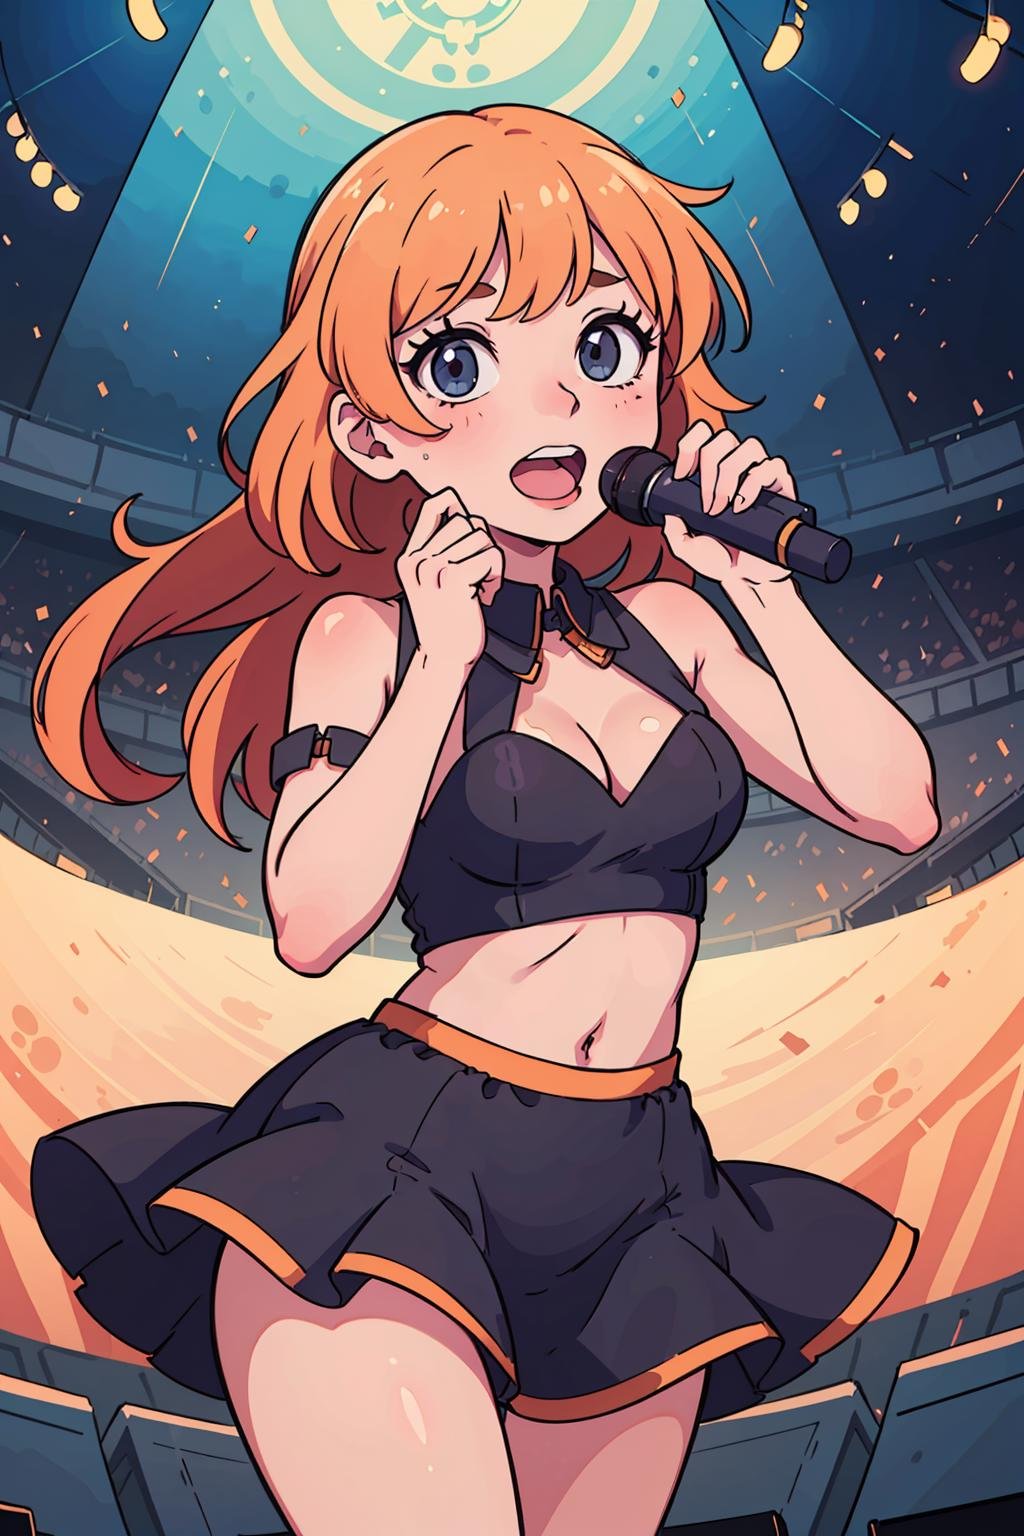 (best quality:0.8) perfect anime illustration, you're doing great performing at the concert, singing, dancing